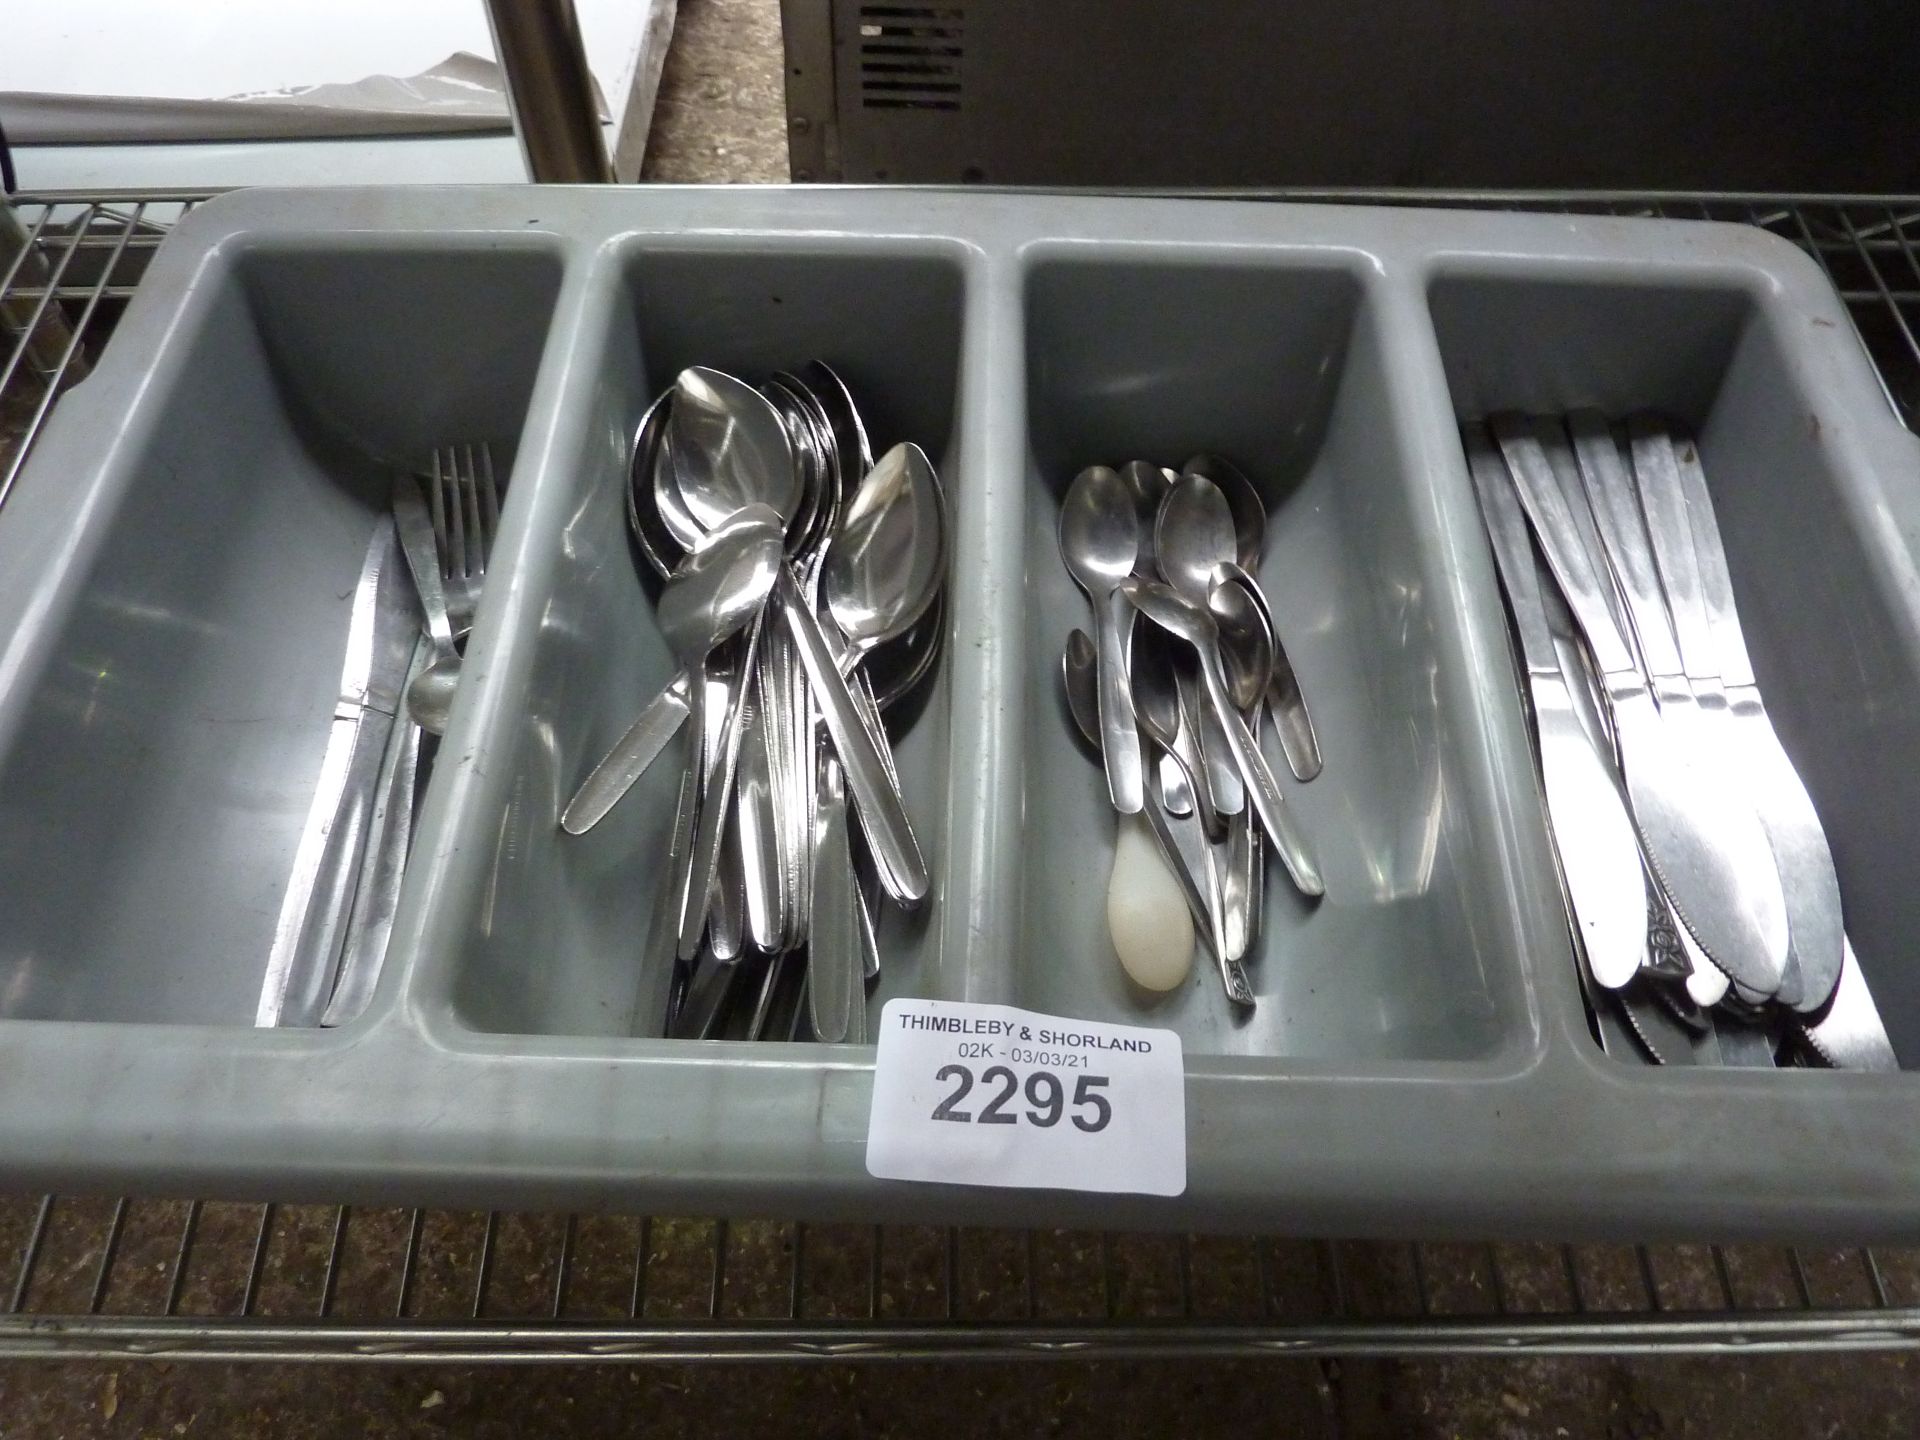 Cutlery and tray